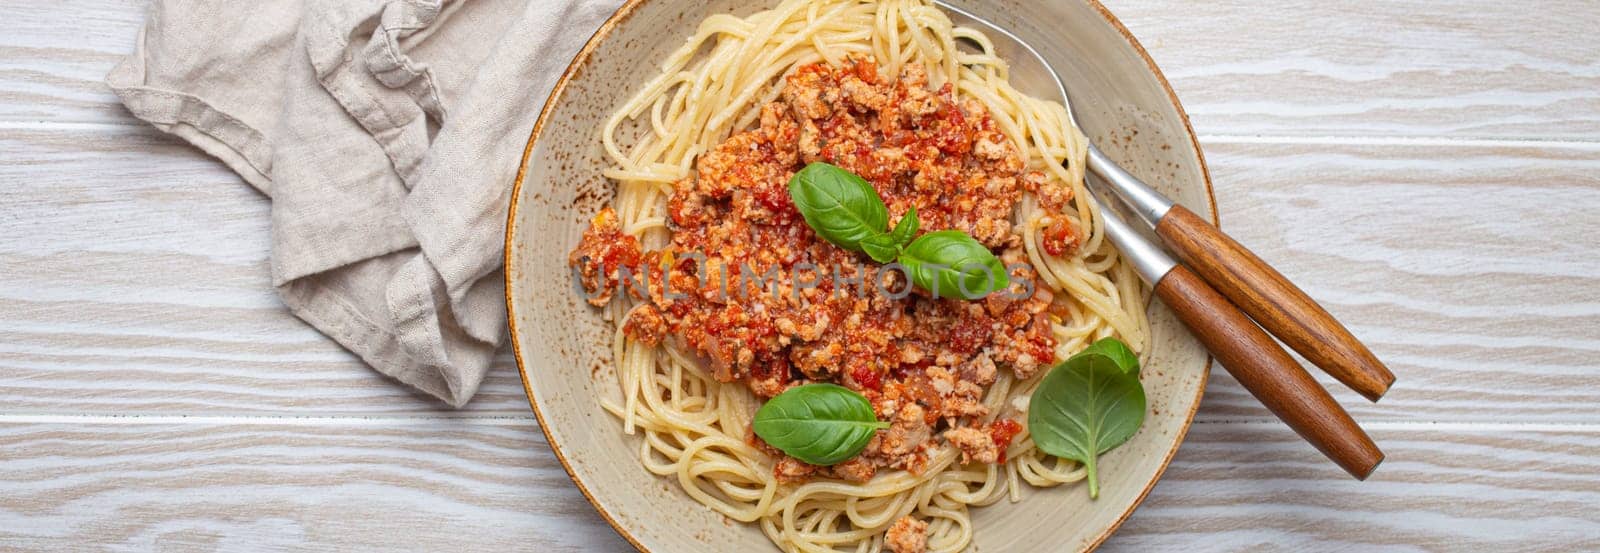 Plate of delicious spaghetti bolognese with fresh basil leaves, served on a rustic wooden table